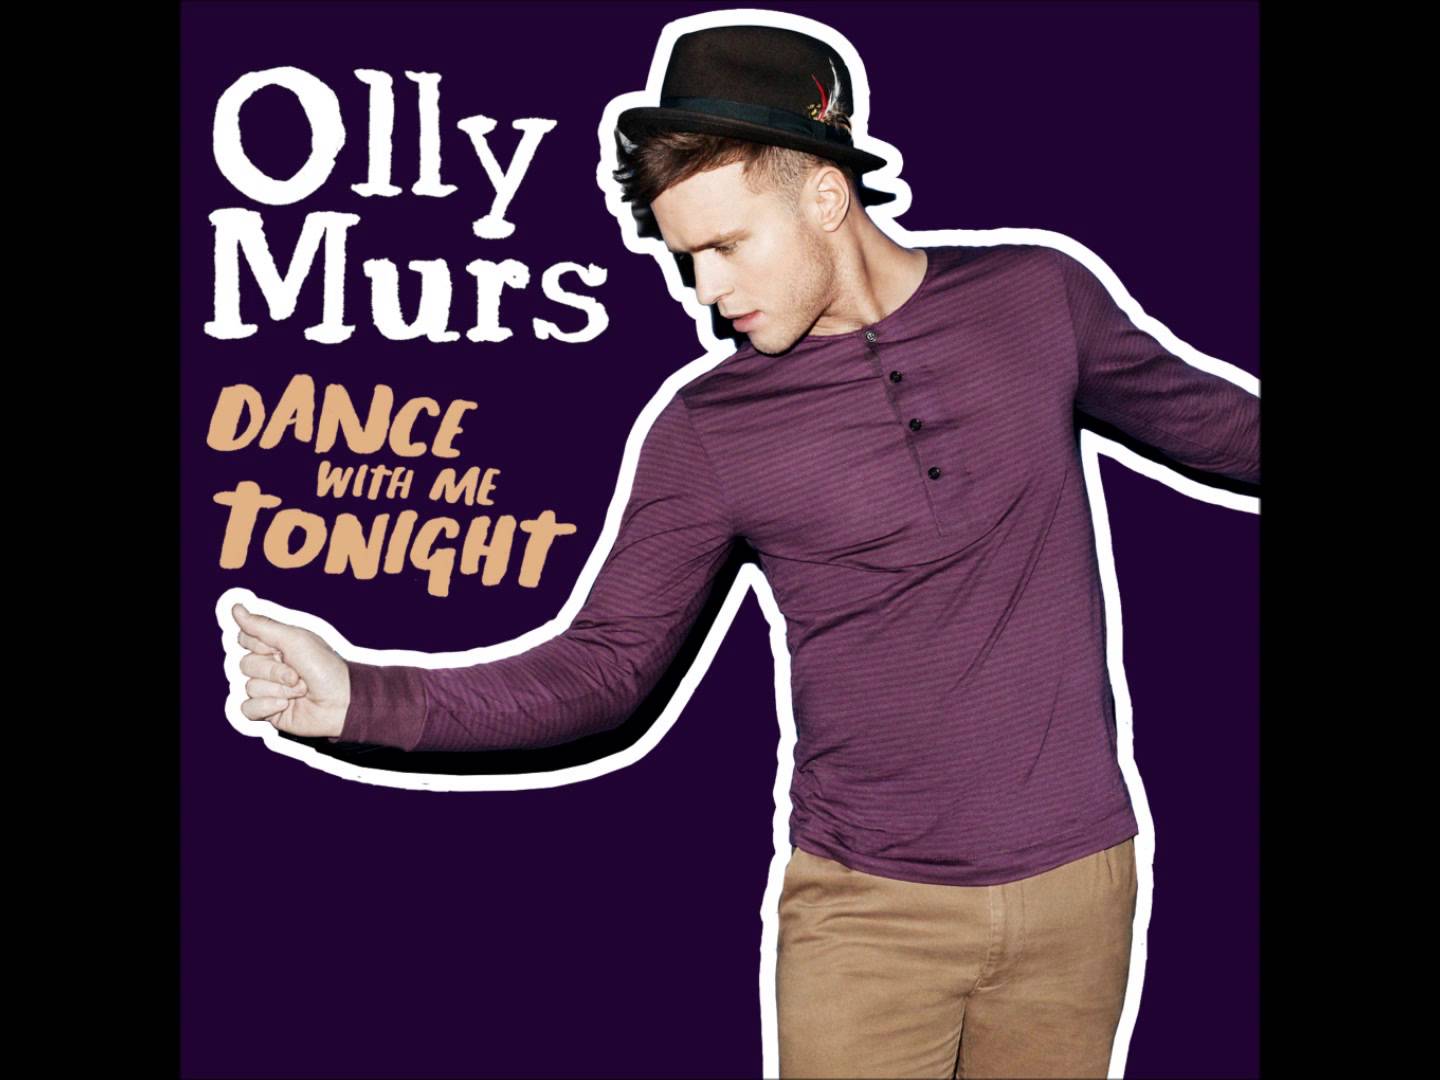 Dance with me tonight by Olly Murs